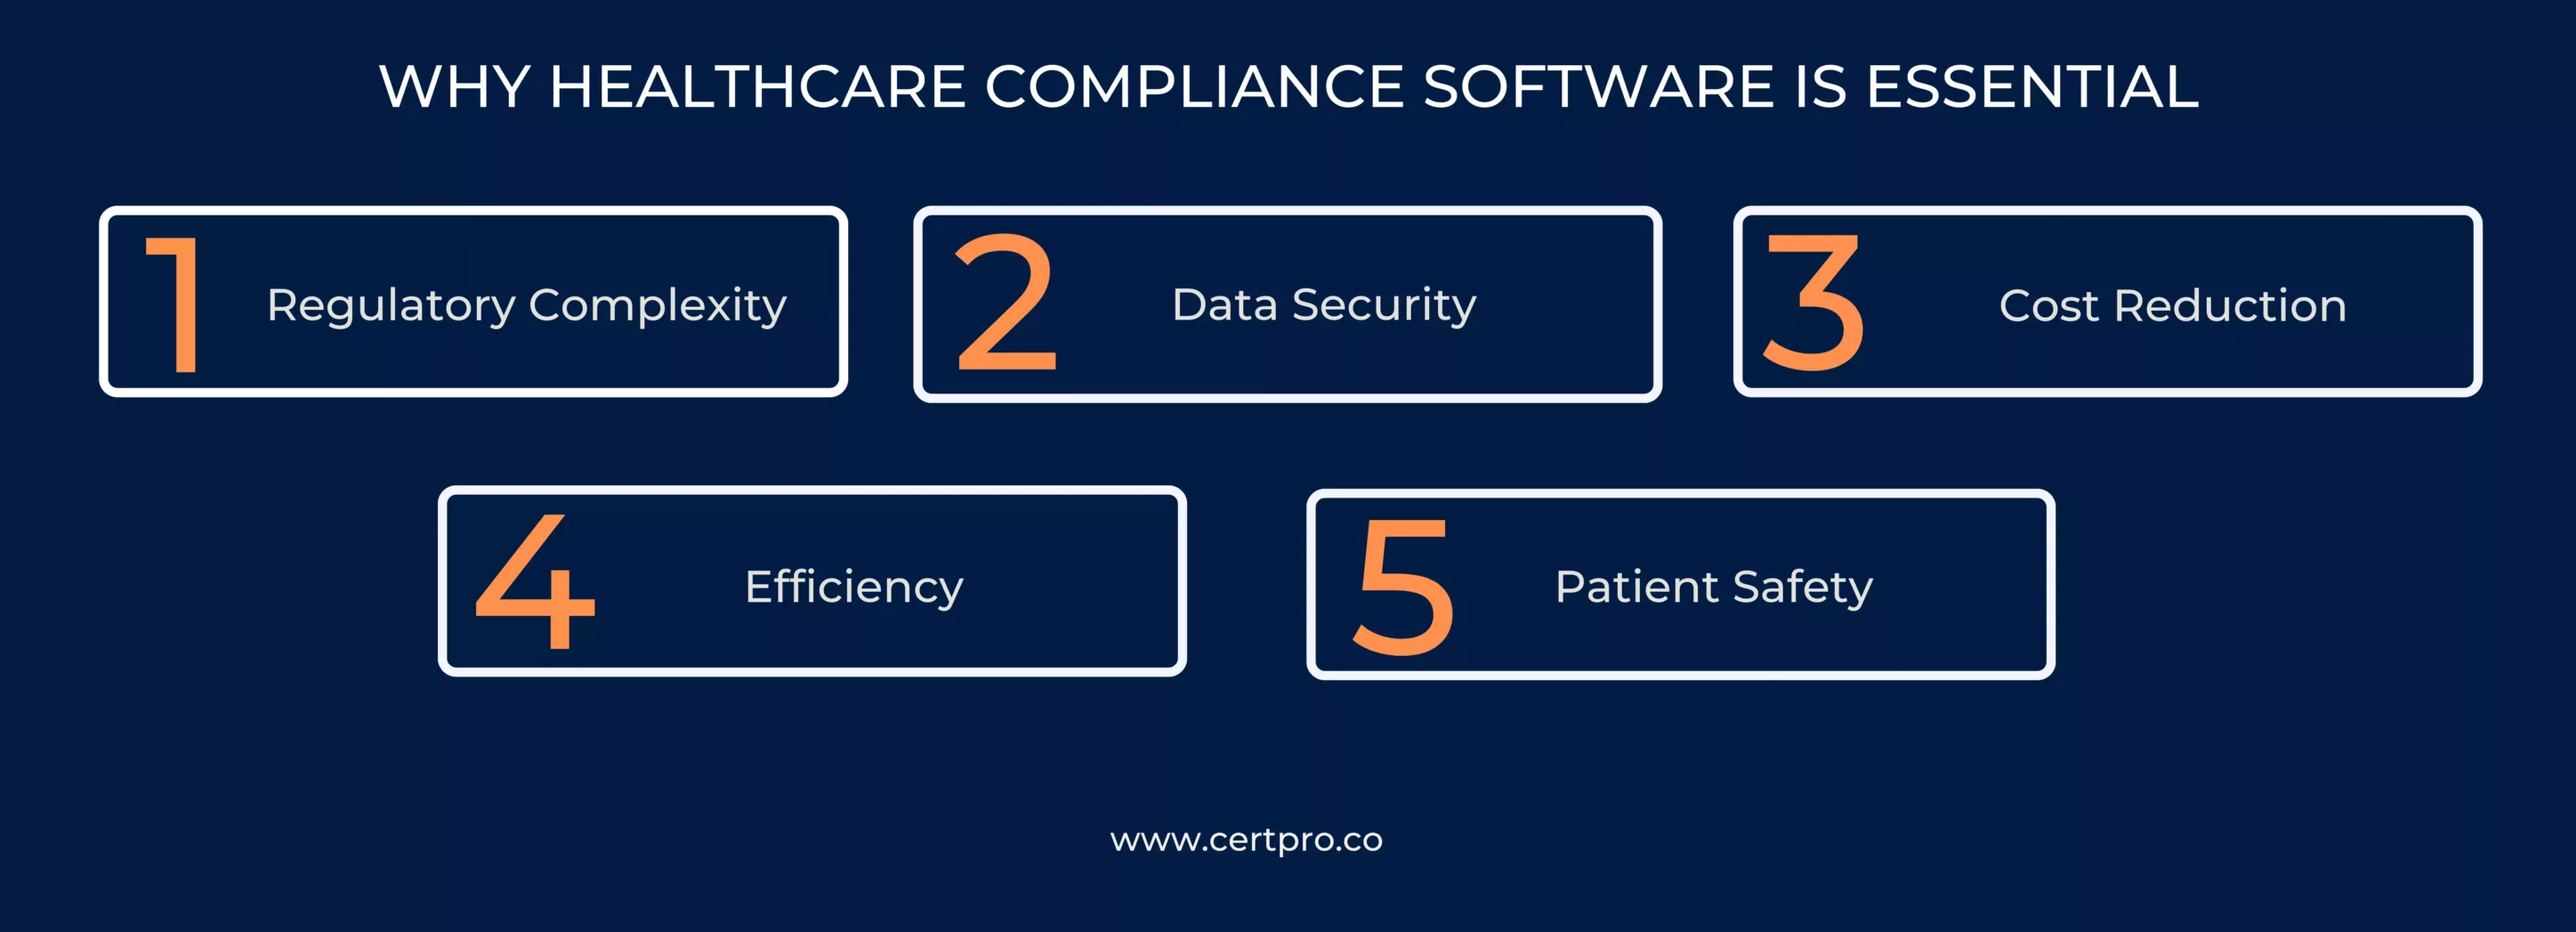 HEALTHCARE COMPLIANCE SOFTWARE ..